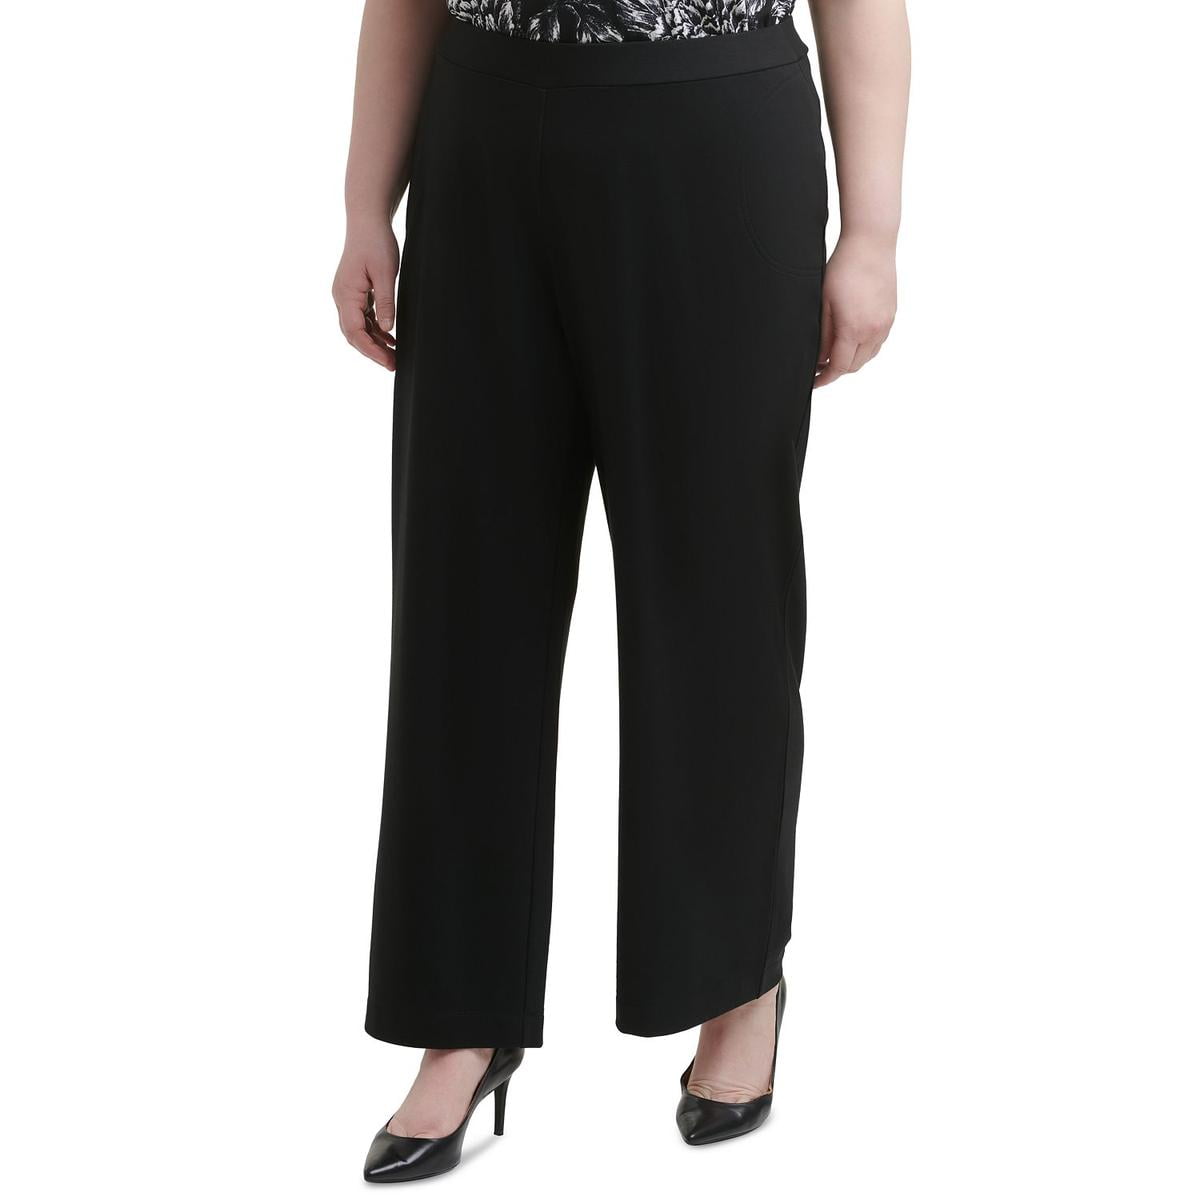 Peck and Peck Women's Black Polyester Straight Leg Work Pants Size 6